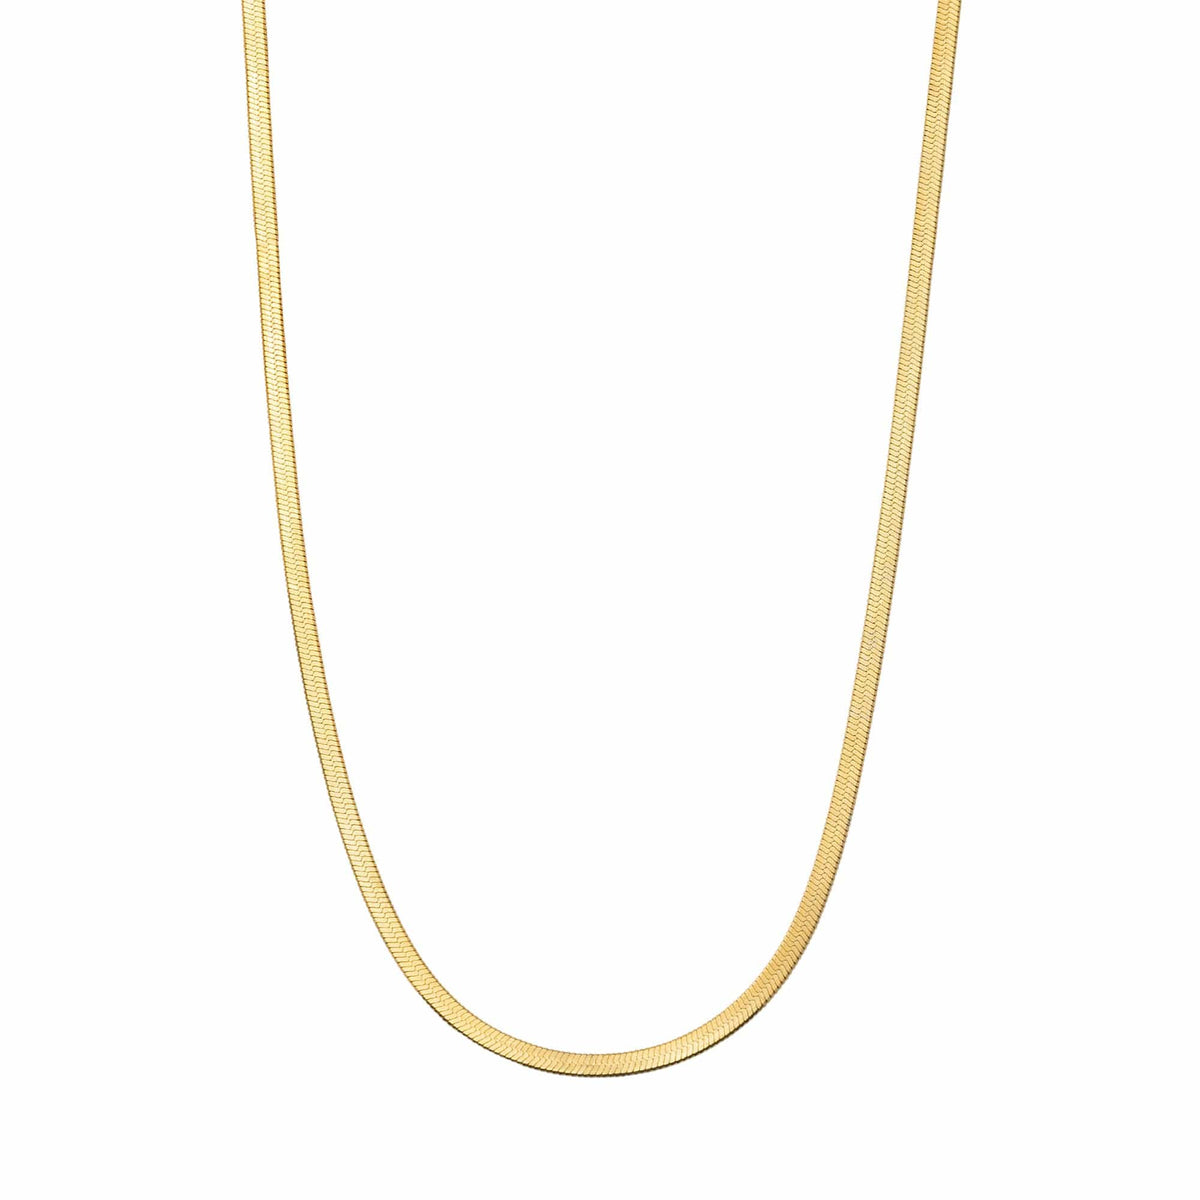 BohoMoon Stainless Steel Stephanie Necklace Gold